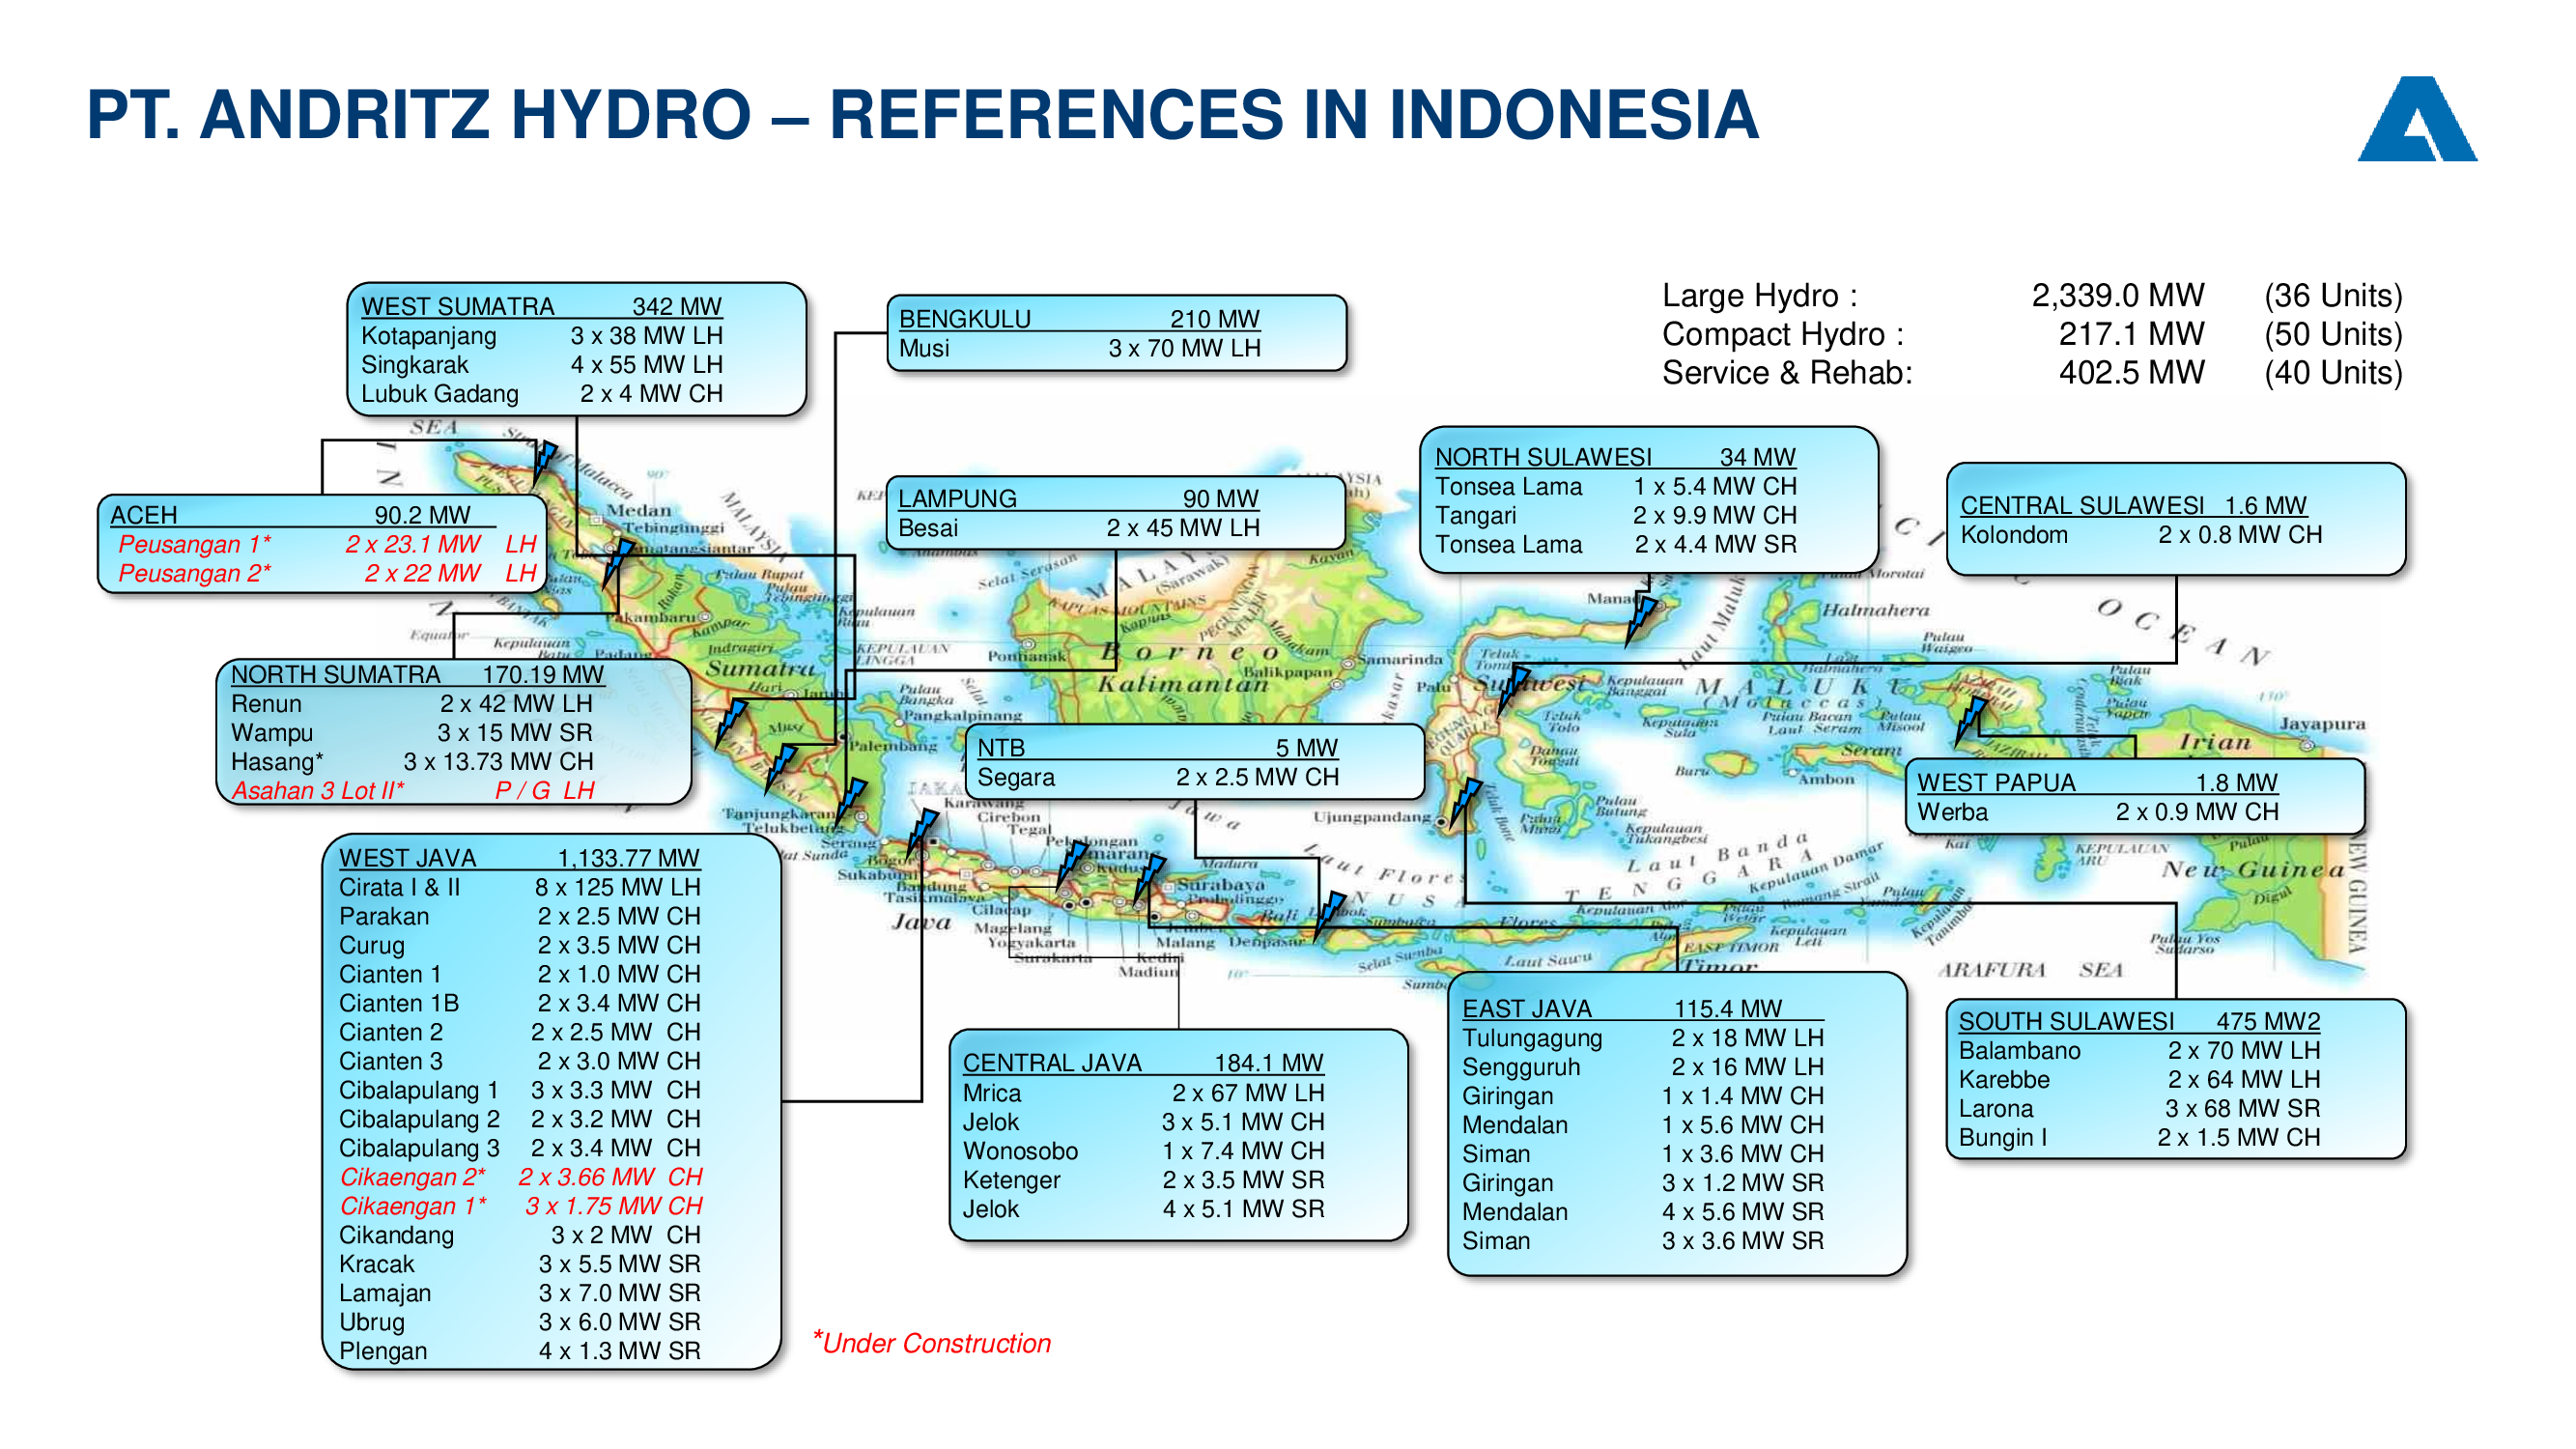 Project References in Indonesia